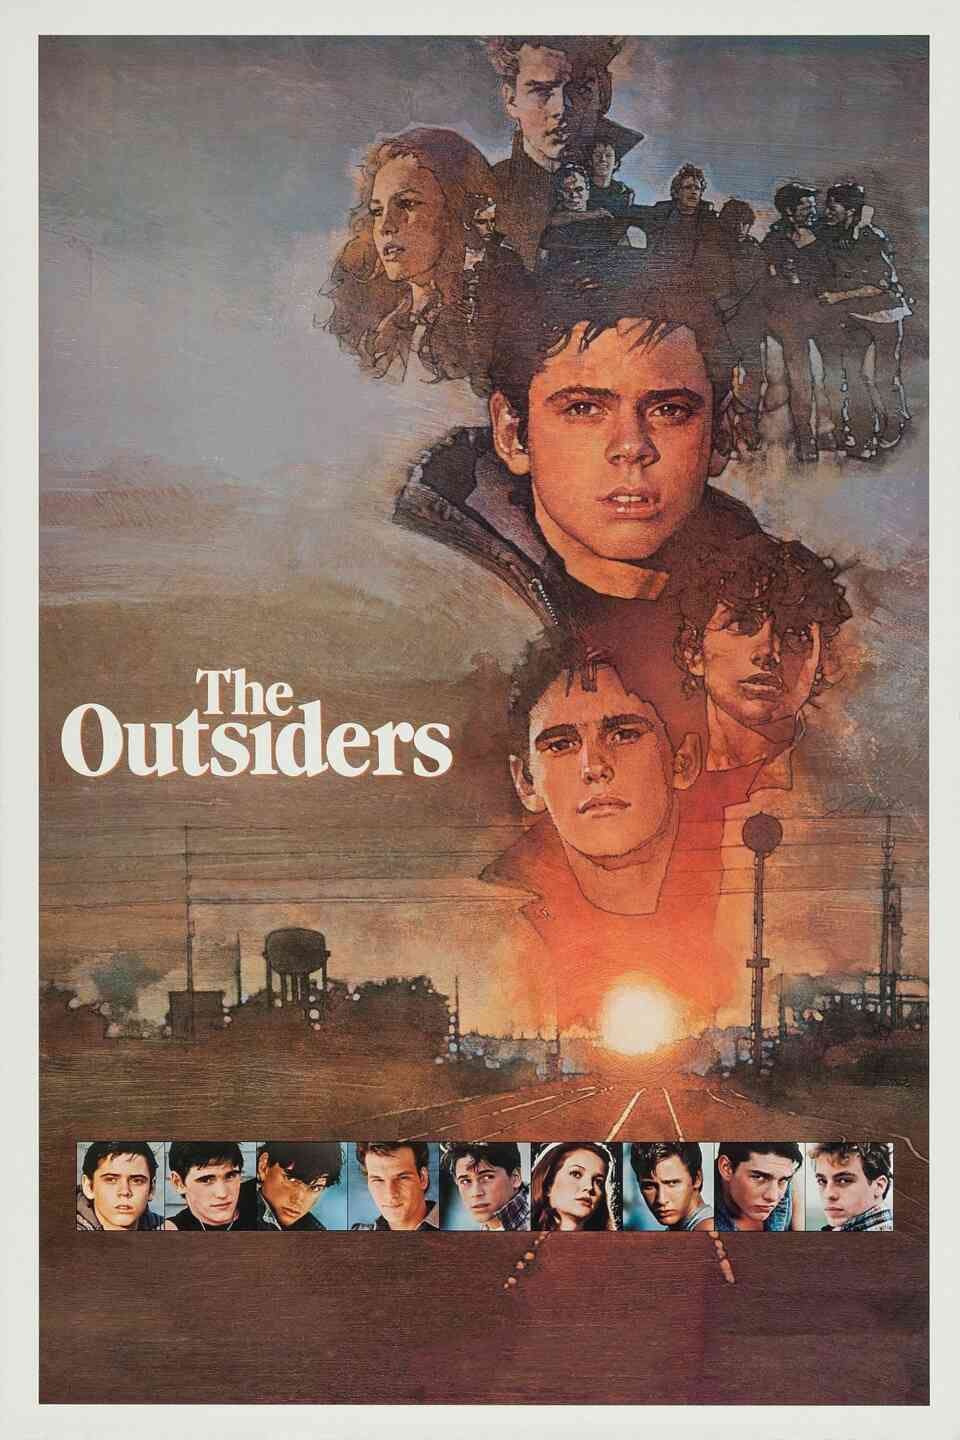 Read The Outsiders screenplay.